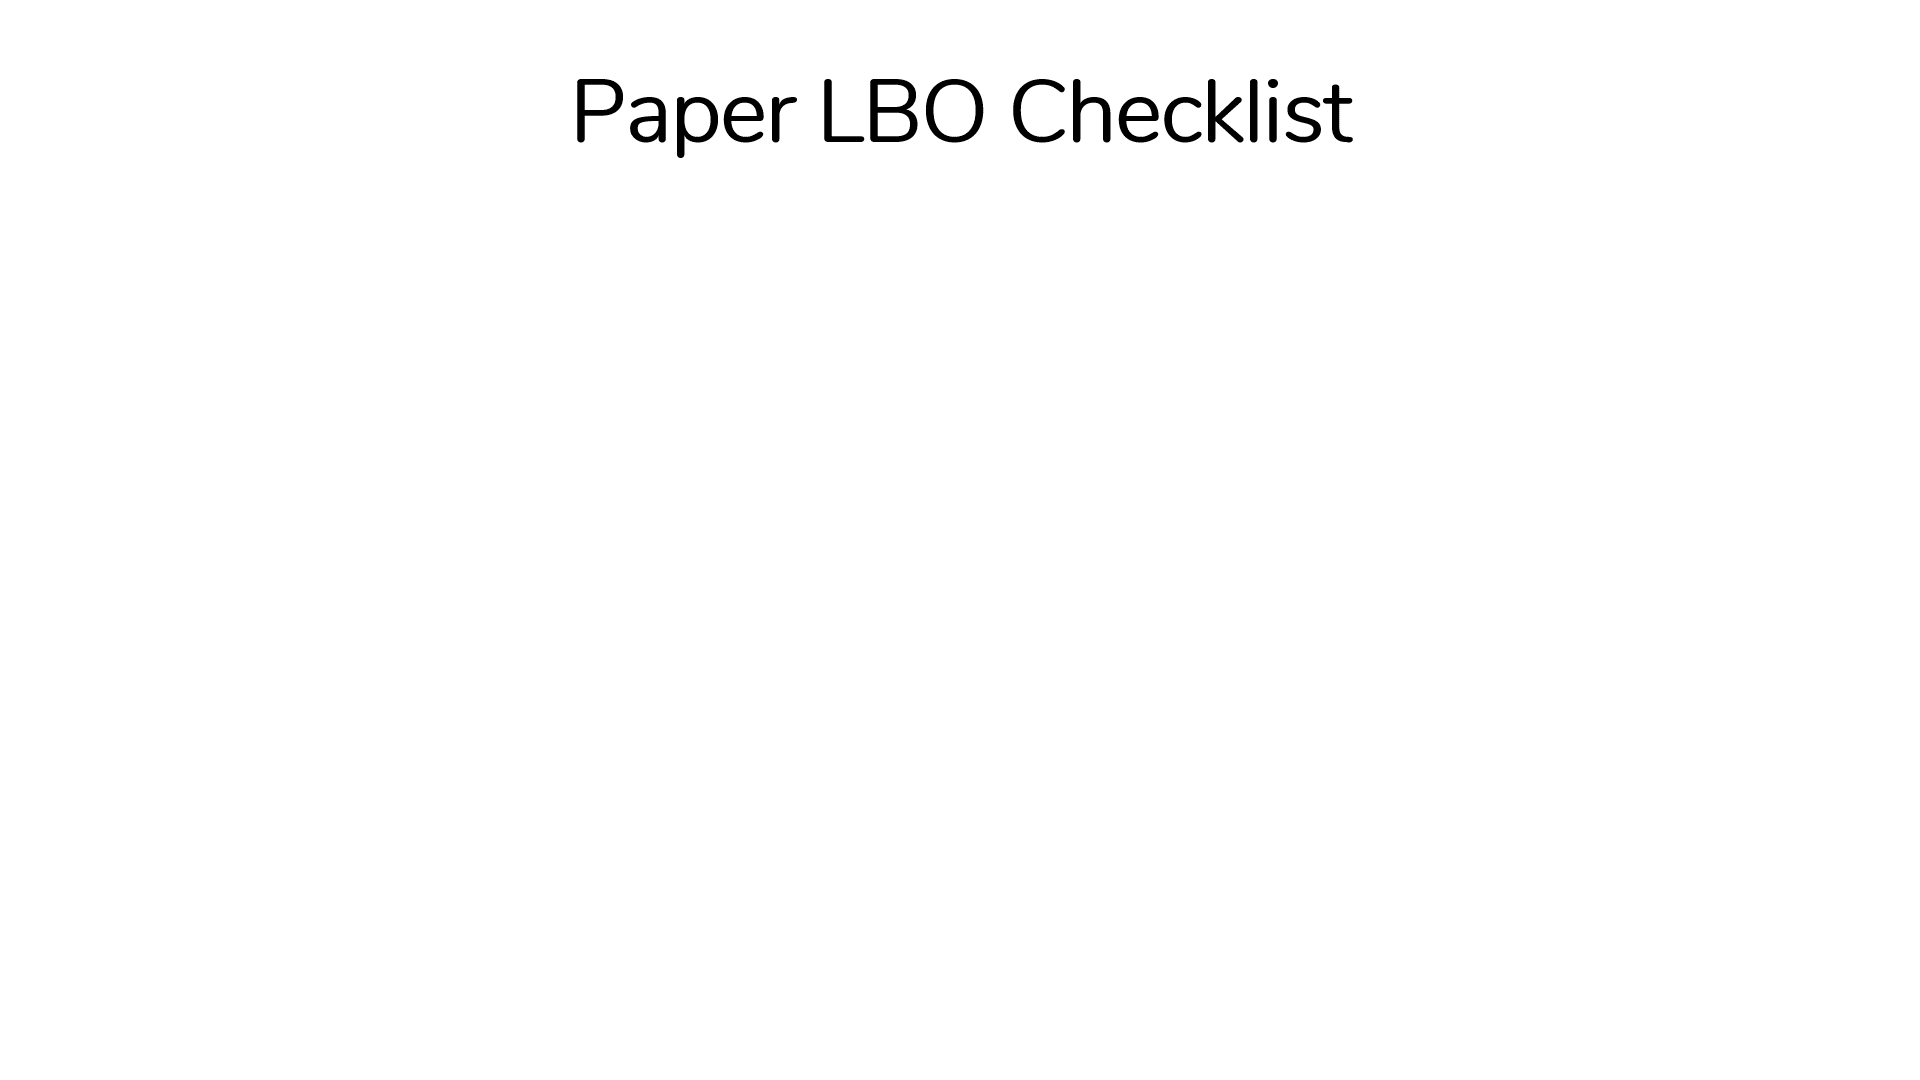 A list of the critical items needed to complete the Paper LBO exercise.